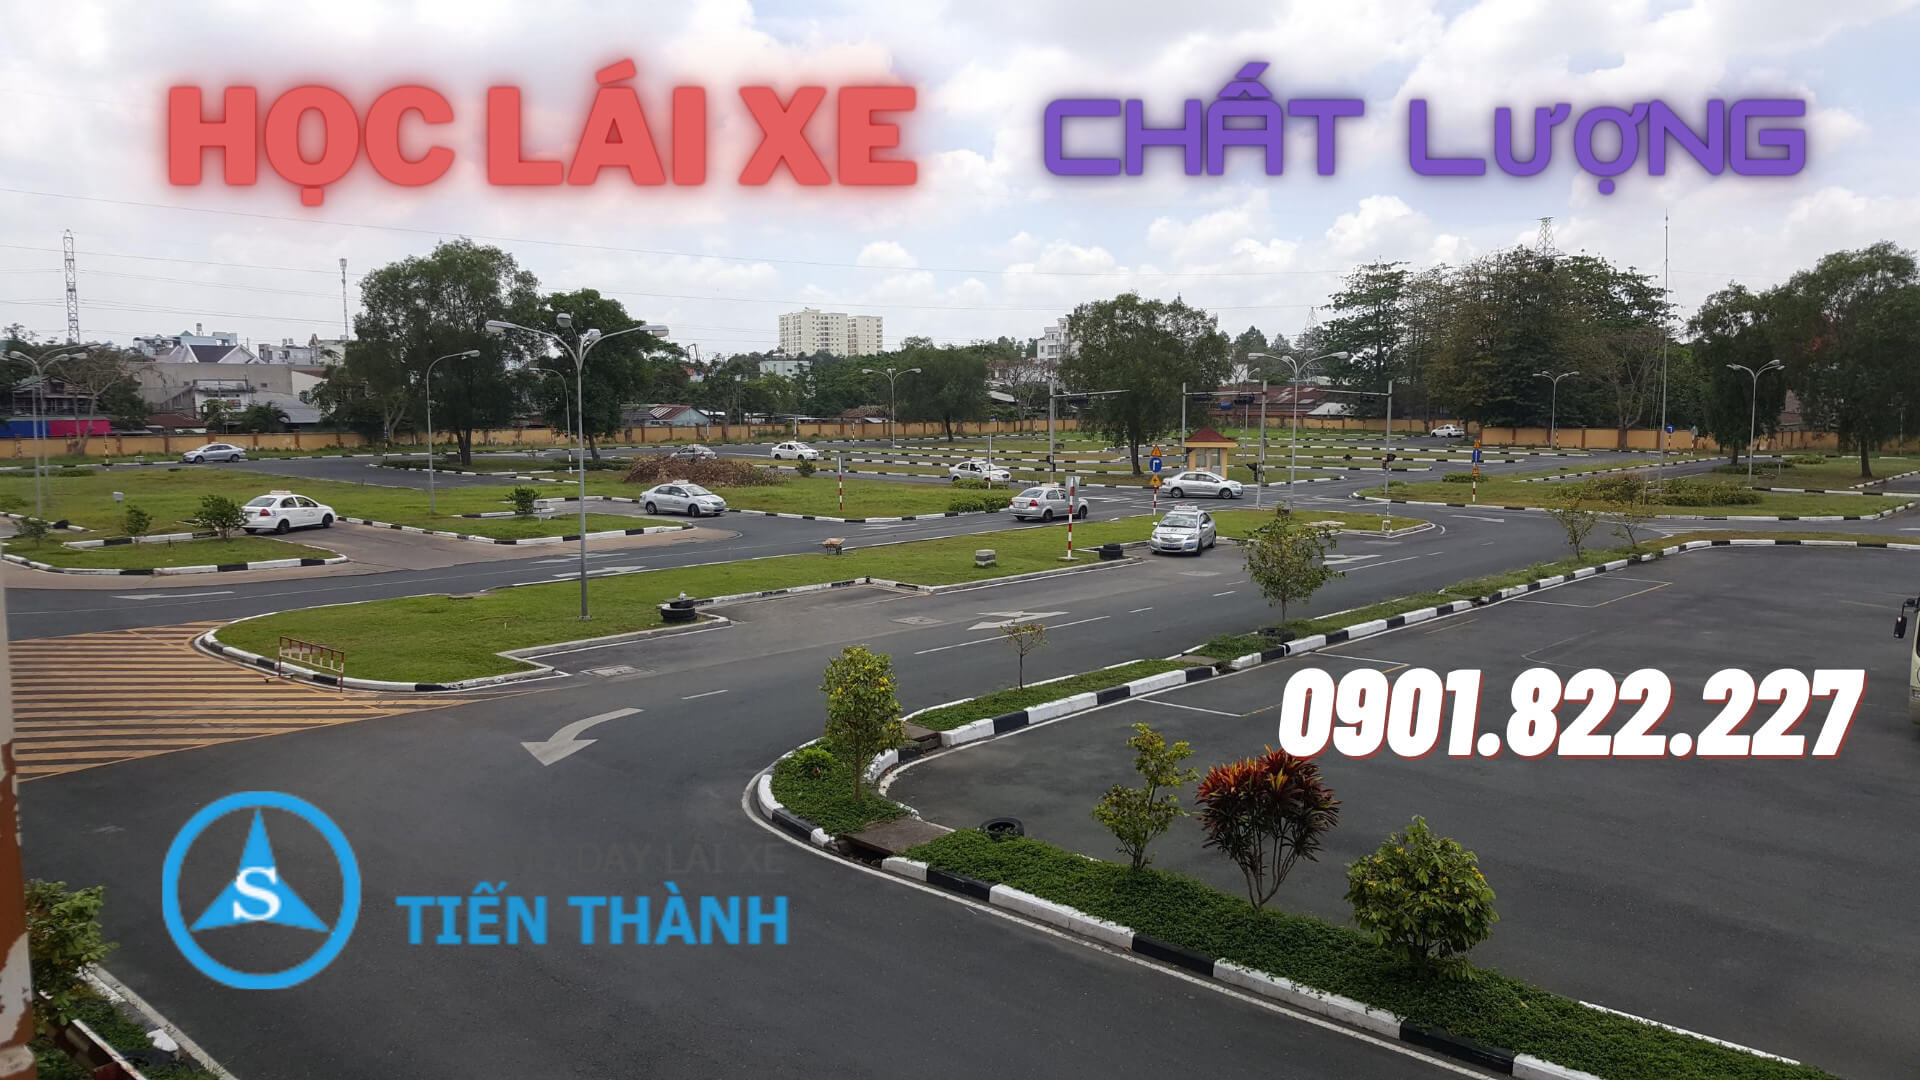 hoc_lai_xe_chat_luong_voi_Tien_thanh